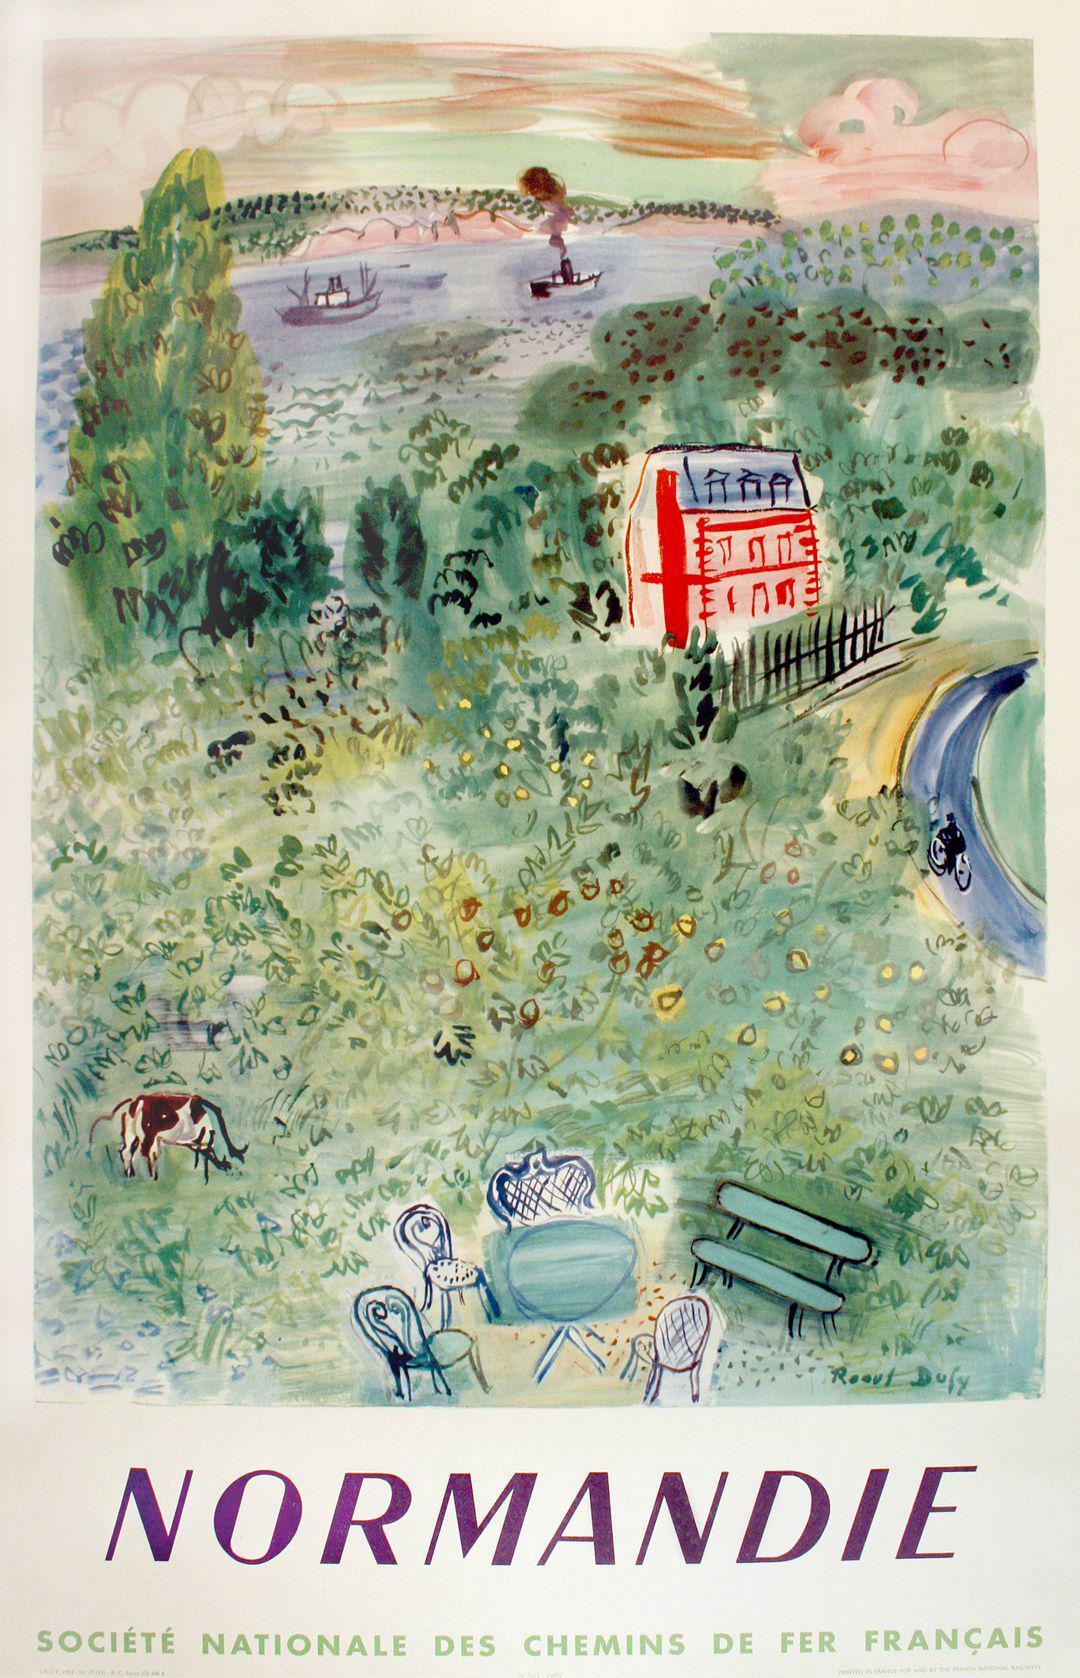 Original SNCF French Travel Poster Normandie by Raoul Dufy 1954